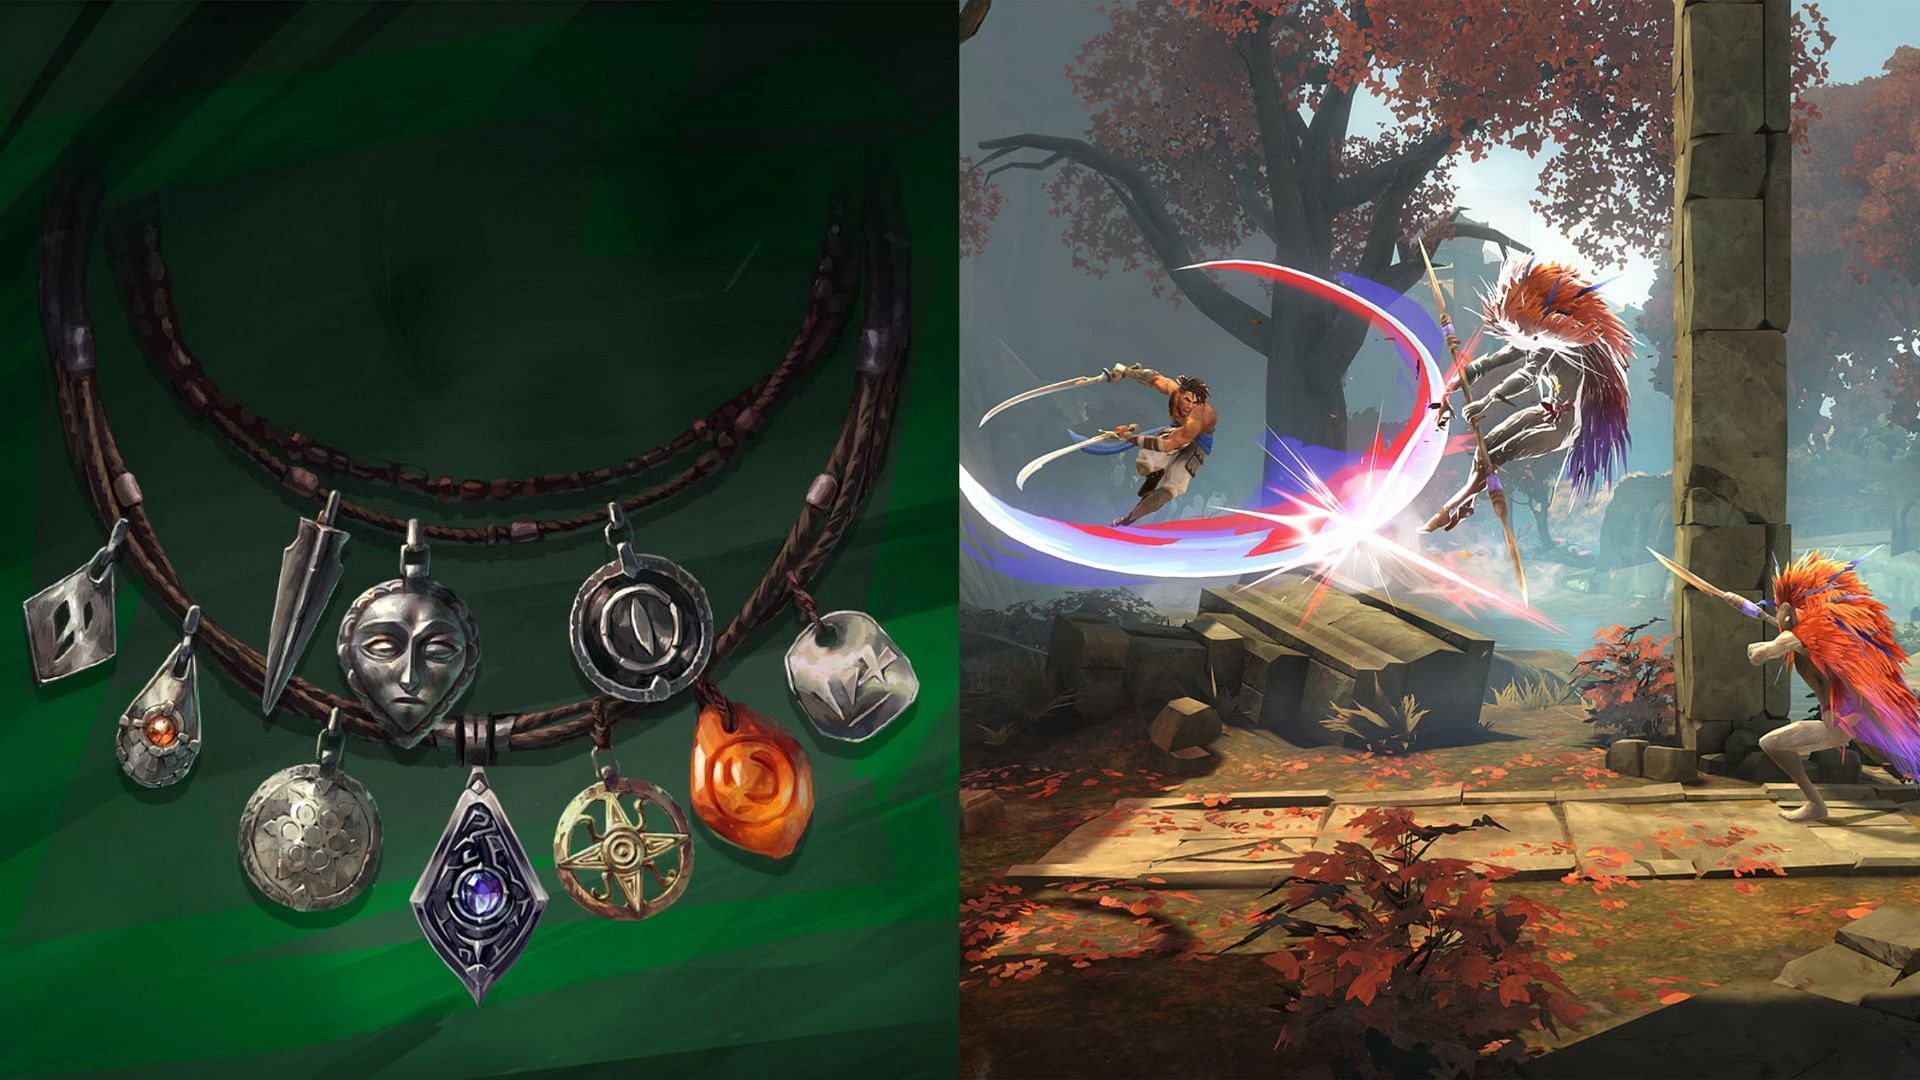 The game introduces powerful items known as Amulets (Image via Ubisoft and Twiter/@princeofpersia)